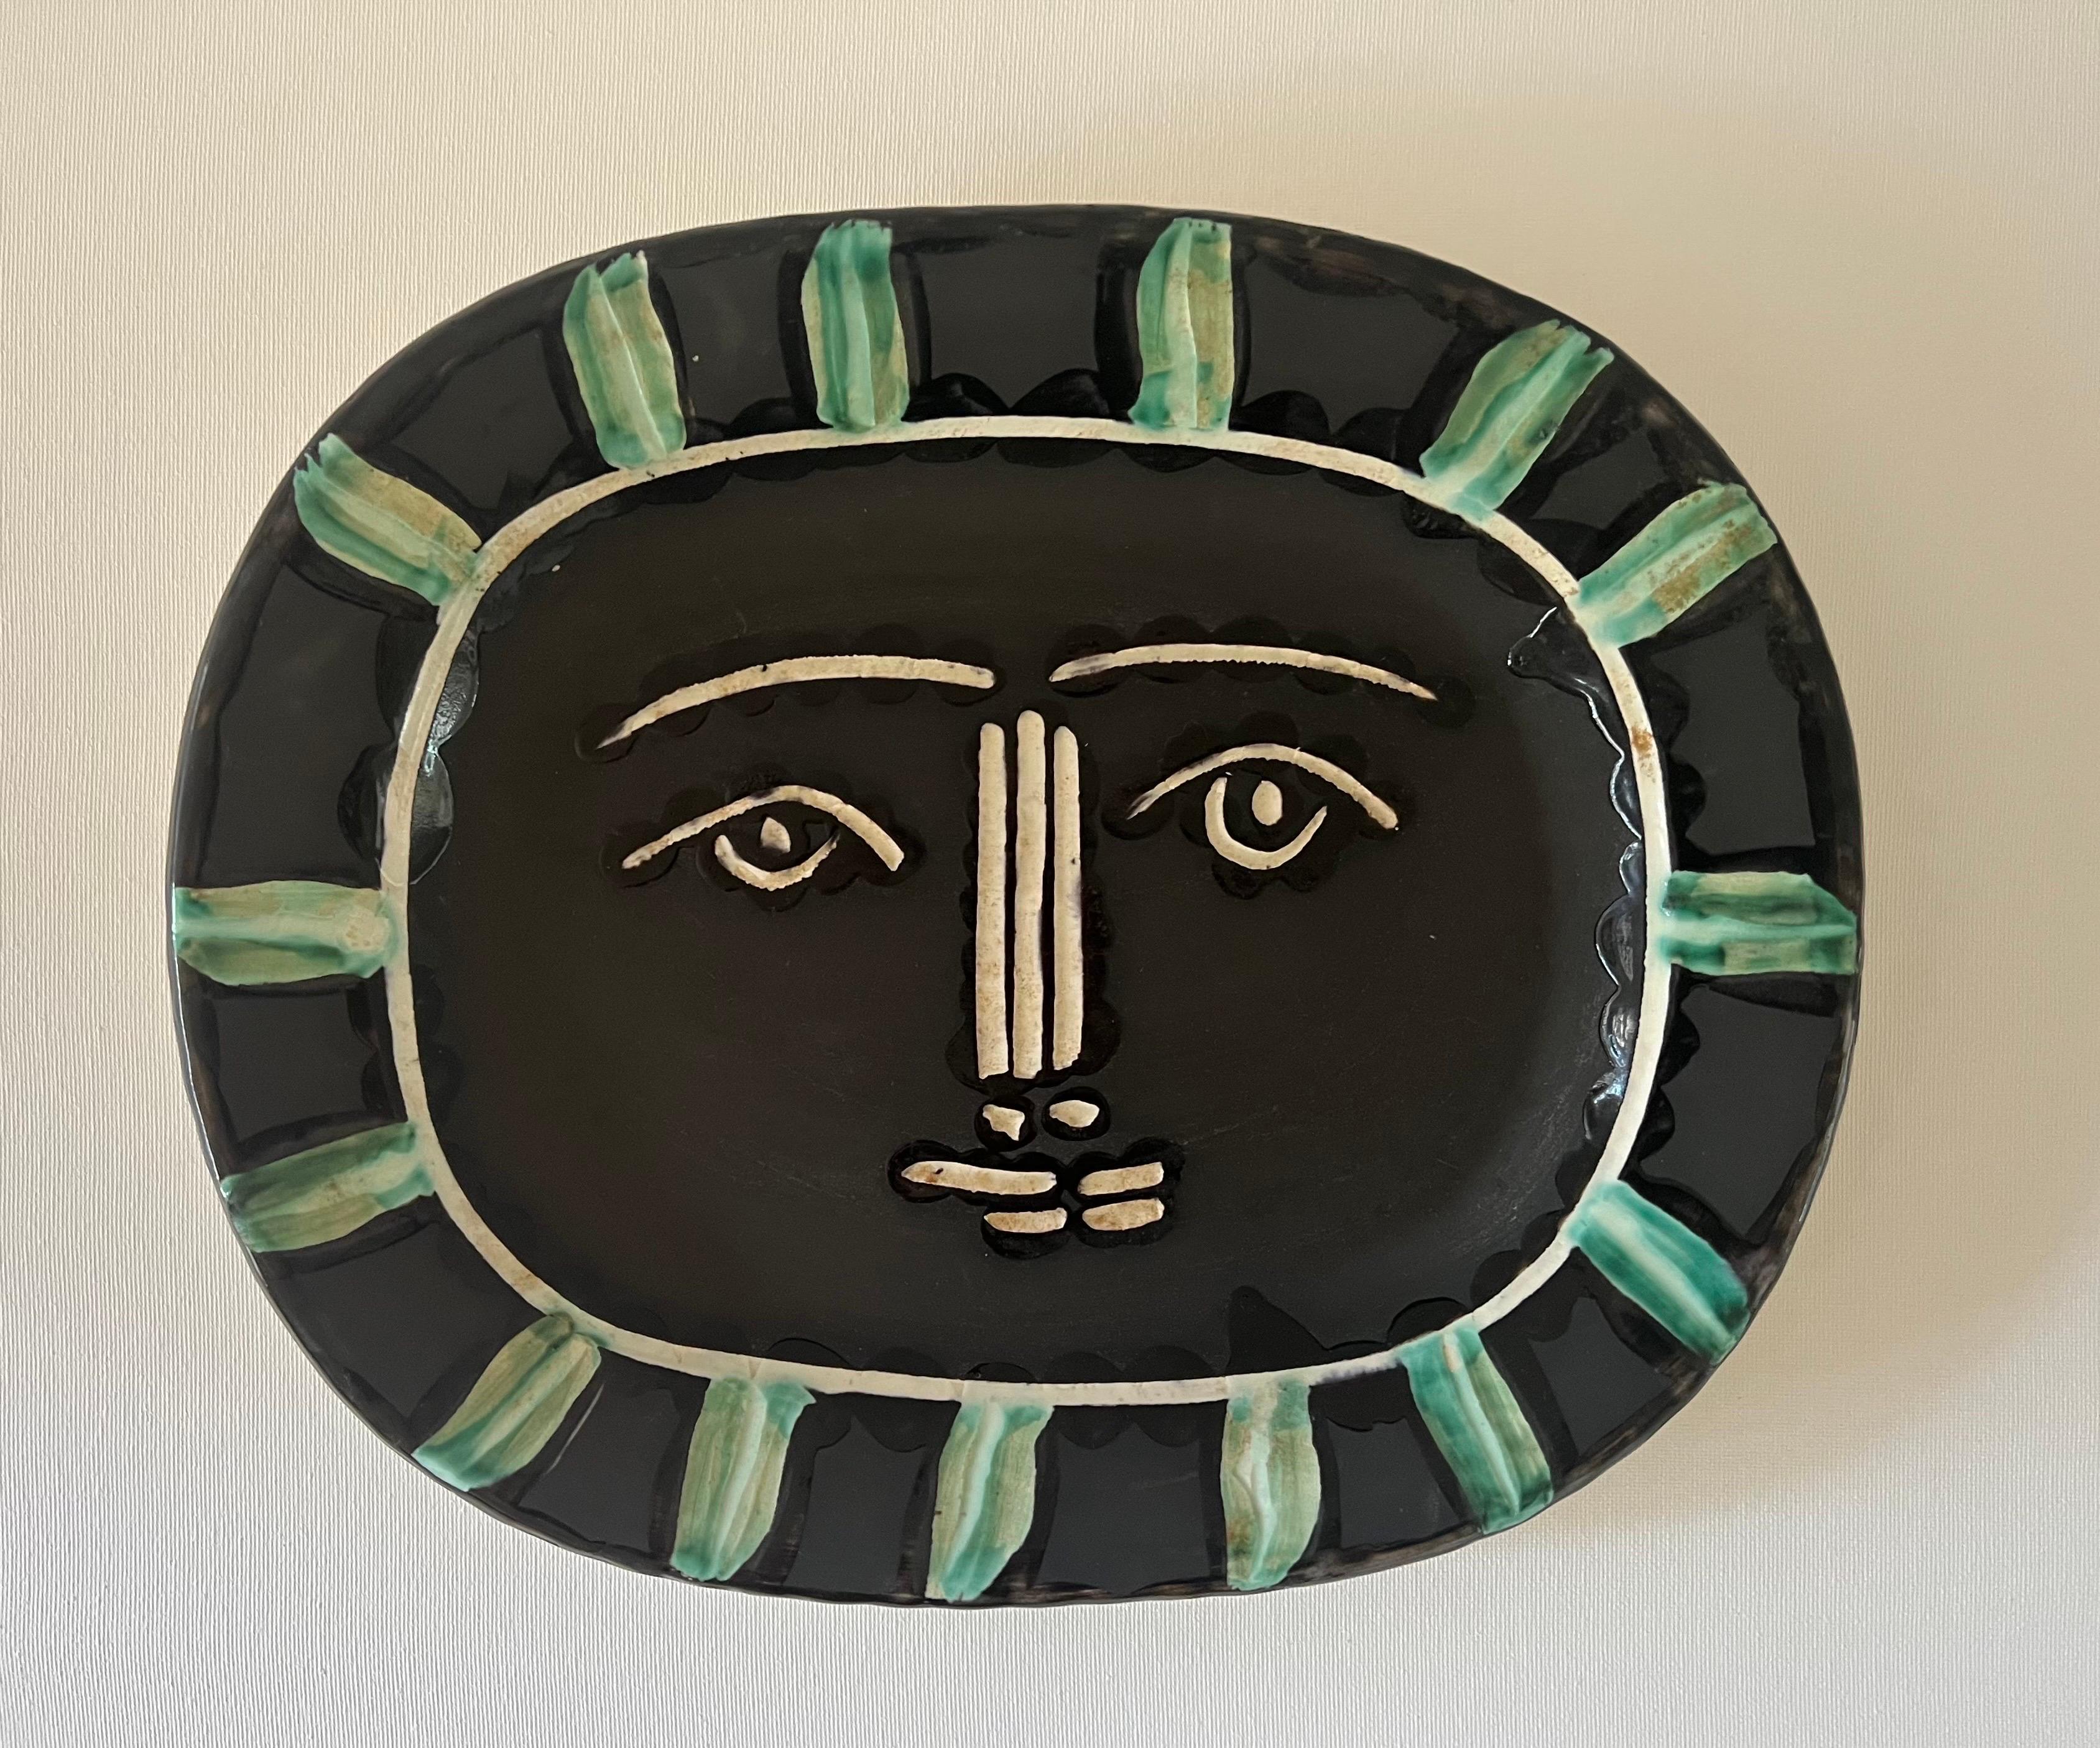 The engraved and brush painted ceramic plate, Visage Gris (Grey Face) is one the most iconic pieces created by Pablo Picasso (1881 - 1973) at the Madoura workshop in Vallauris, France. It is said 